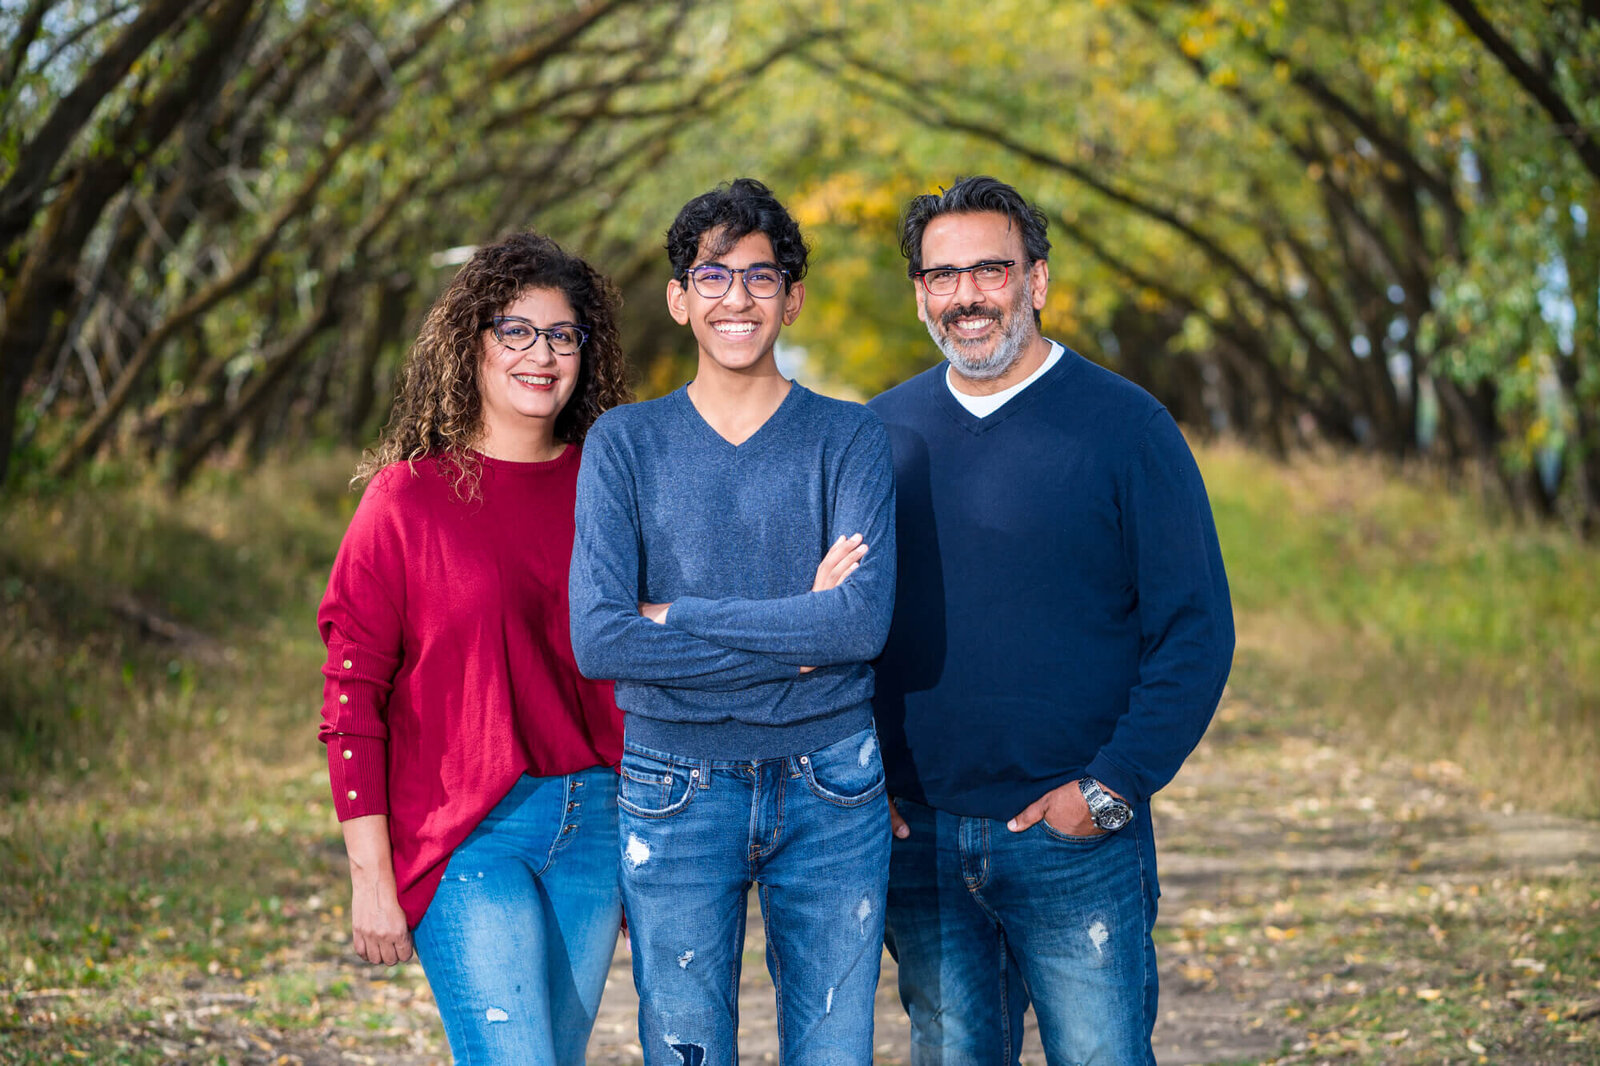 Family of 3 posed in front of arched trees